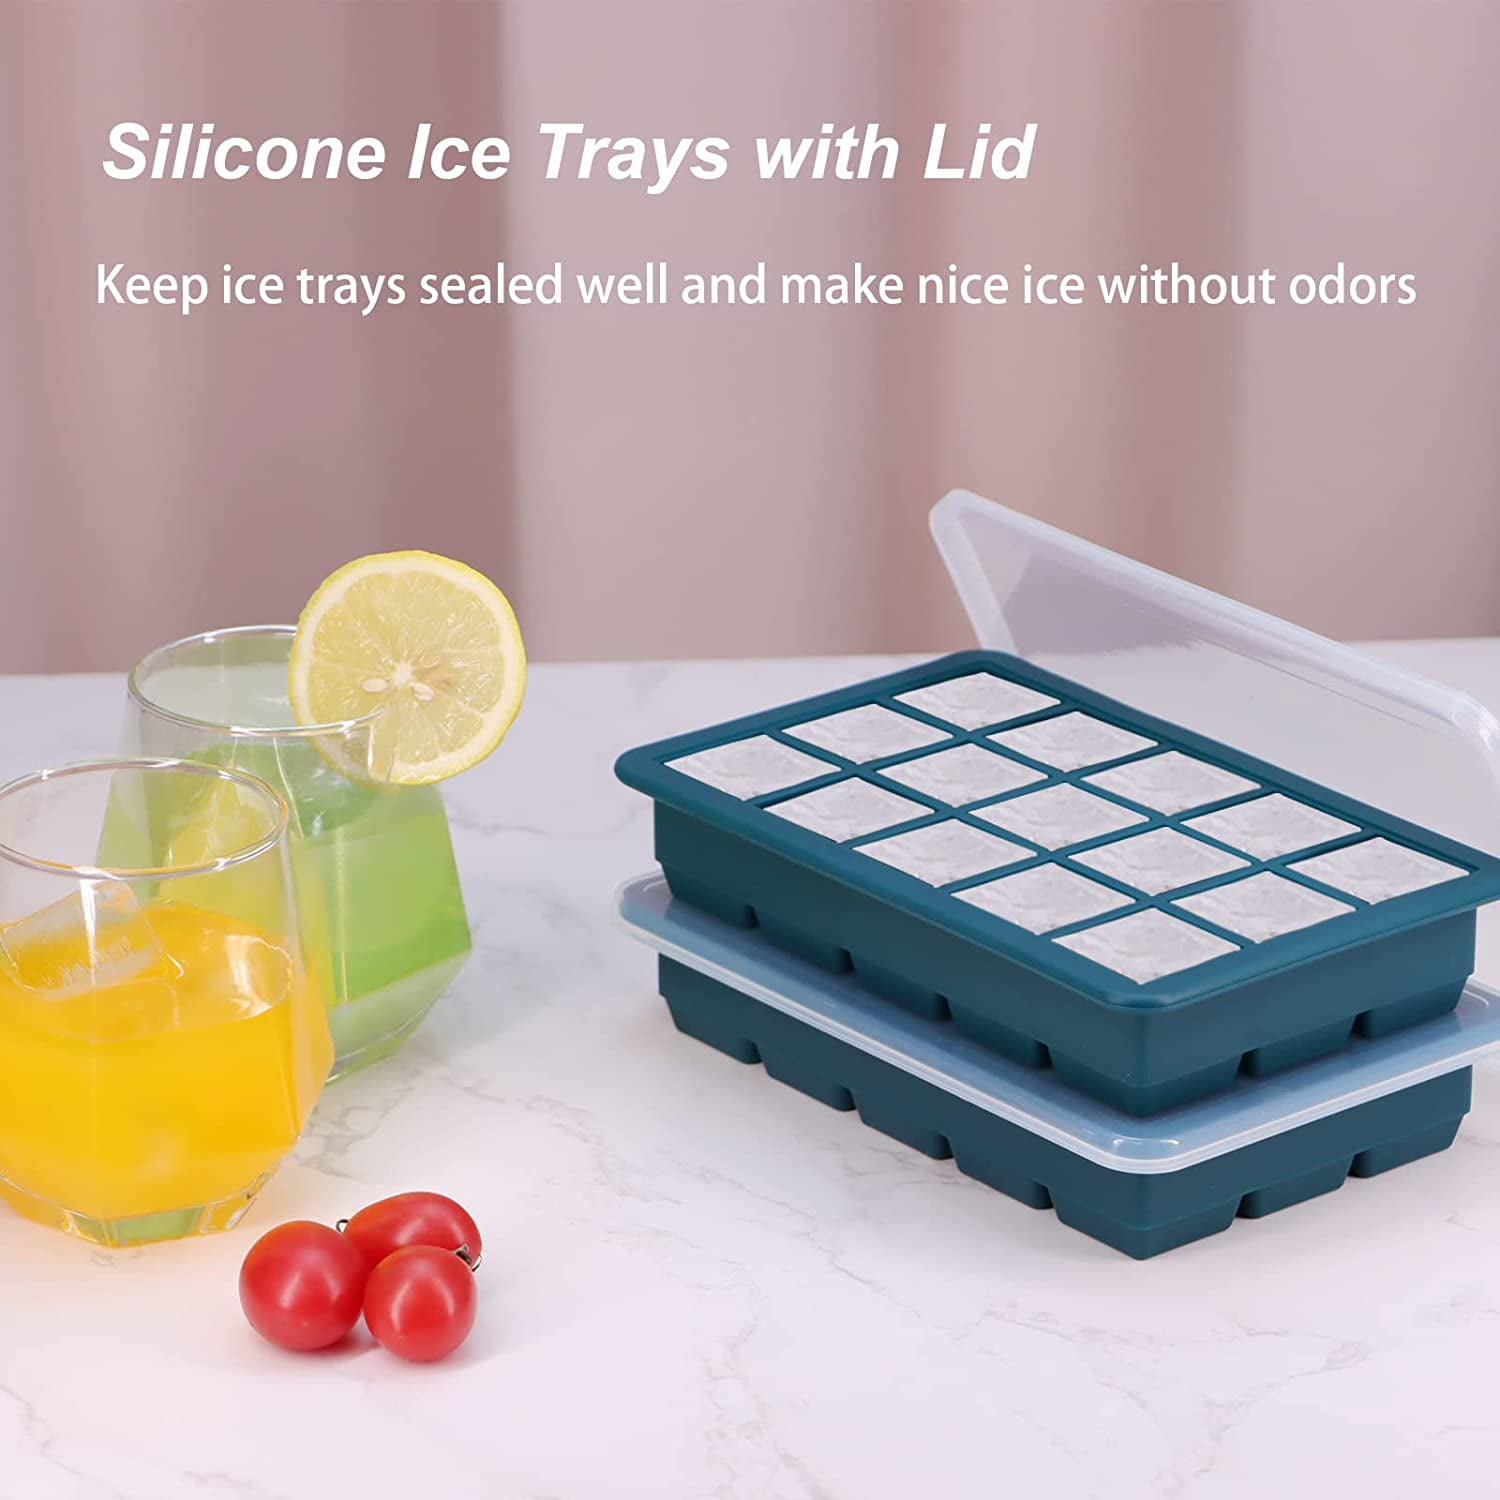 Flexible 15-Piece Purple Silicone Ice Tray Mold (2-Pack) EBH-613